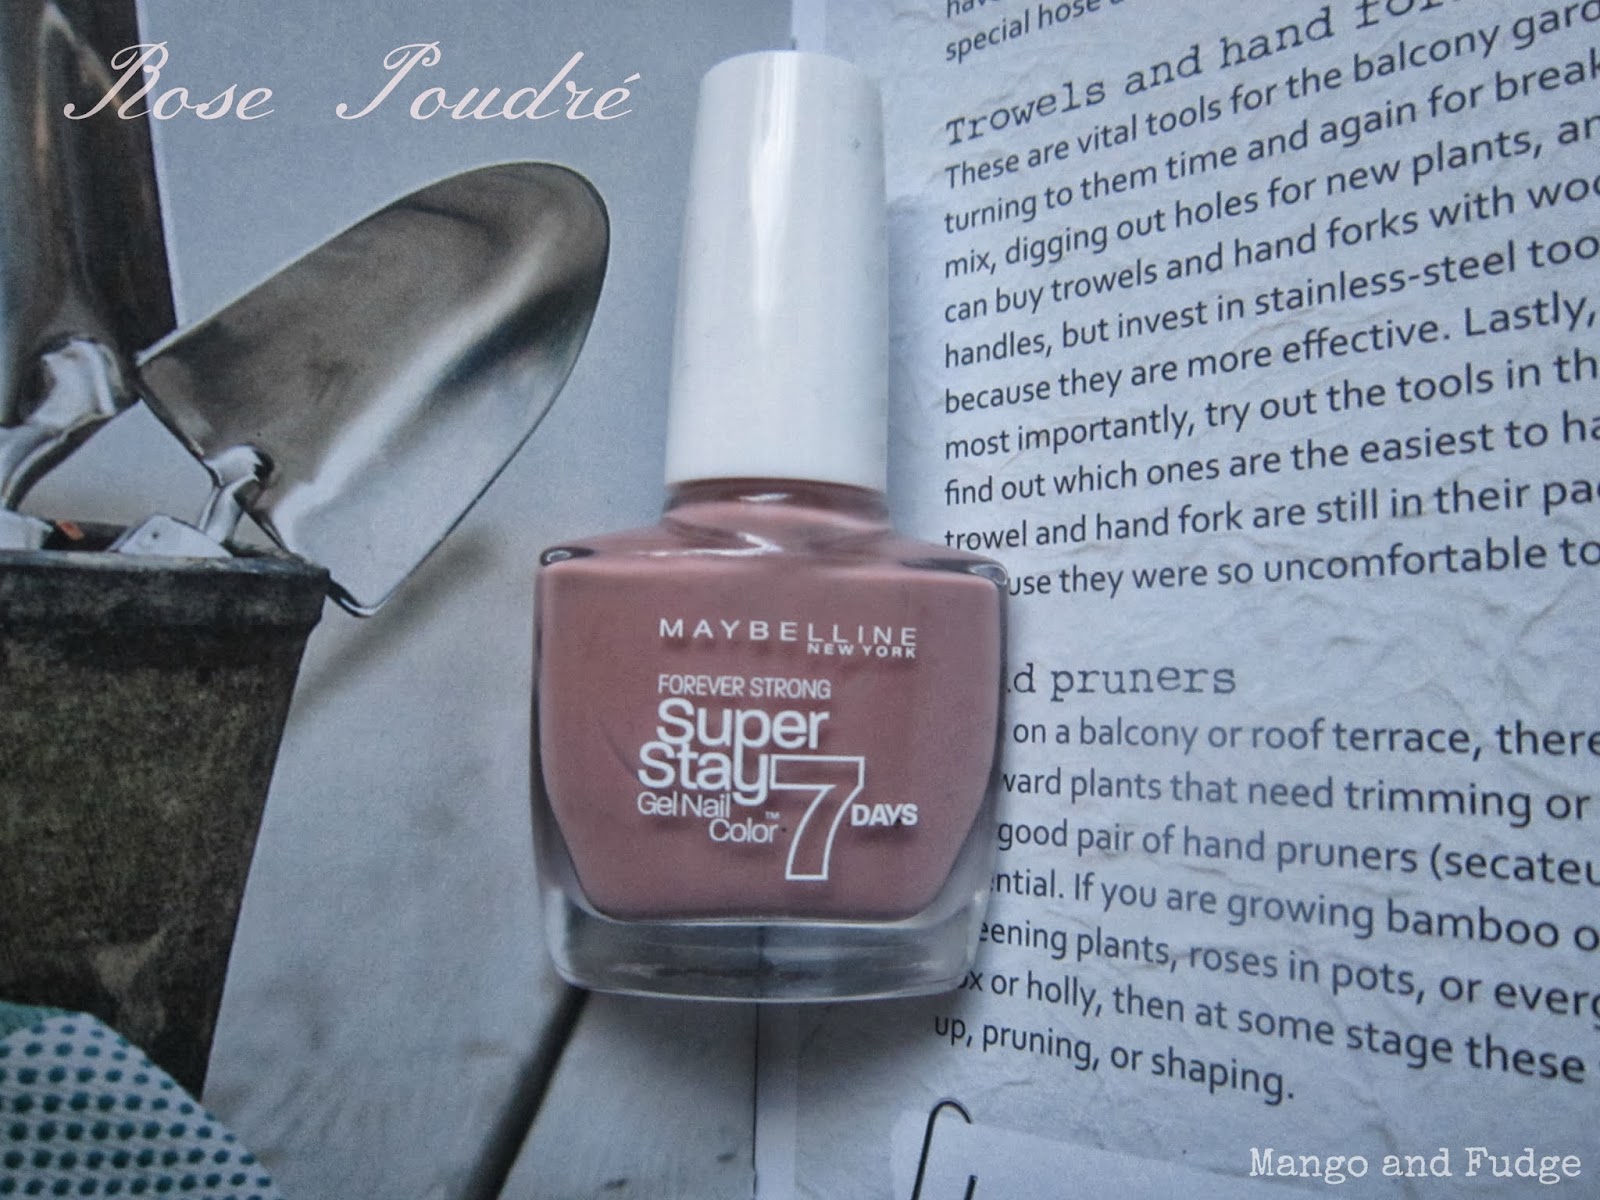 Maybelline Forever Strong SuperStay 7 days Gel Nail Color